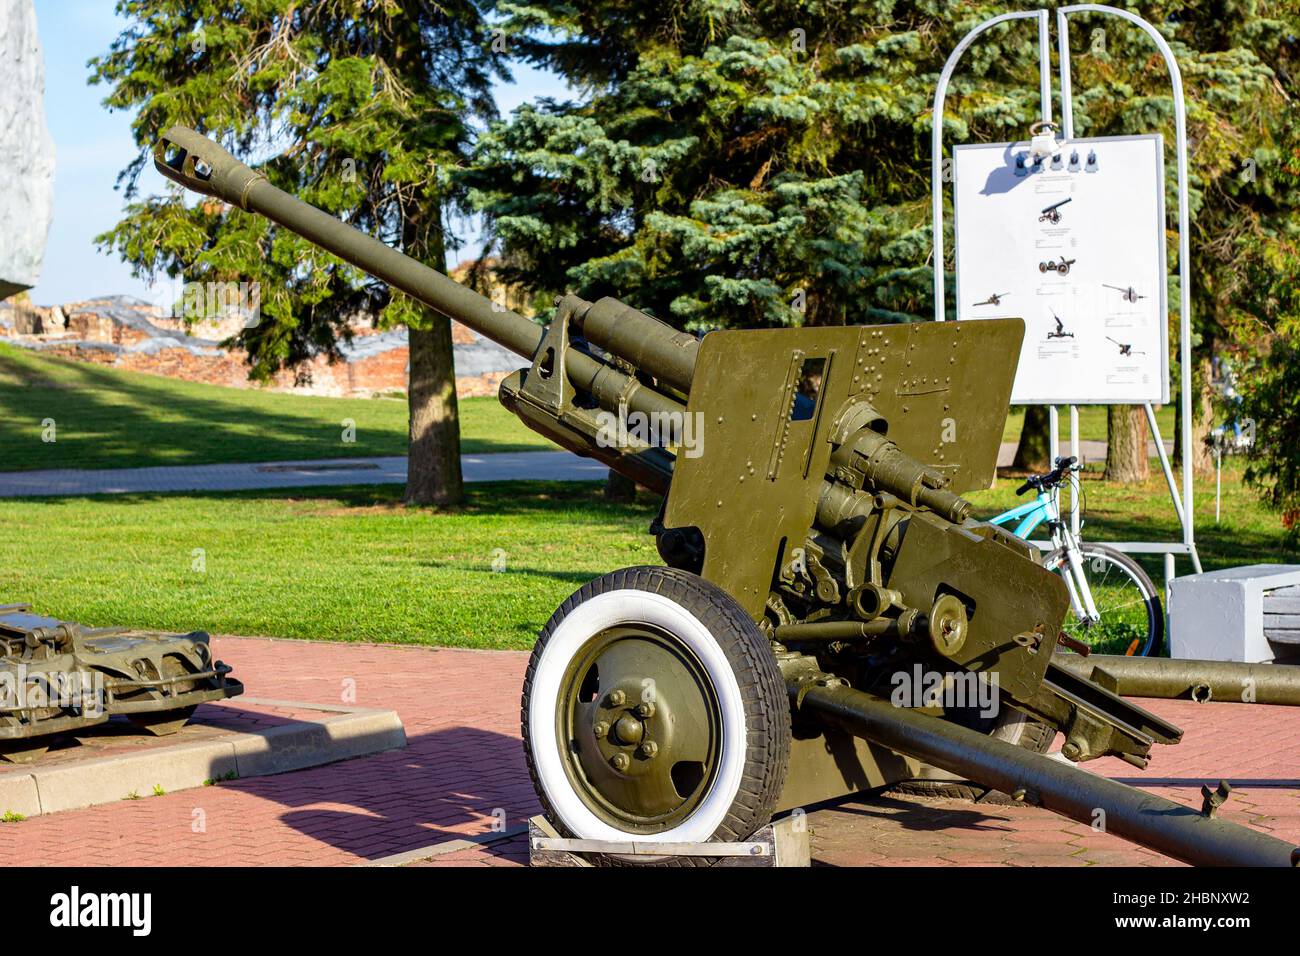 BREST, BELARUS - OCTOBER 18, 2019: Historical artillery gun on the wheels from the World War II age. Close up of a retro military cannon weapon. Stock Photo